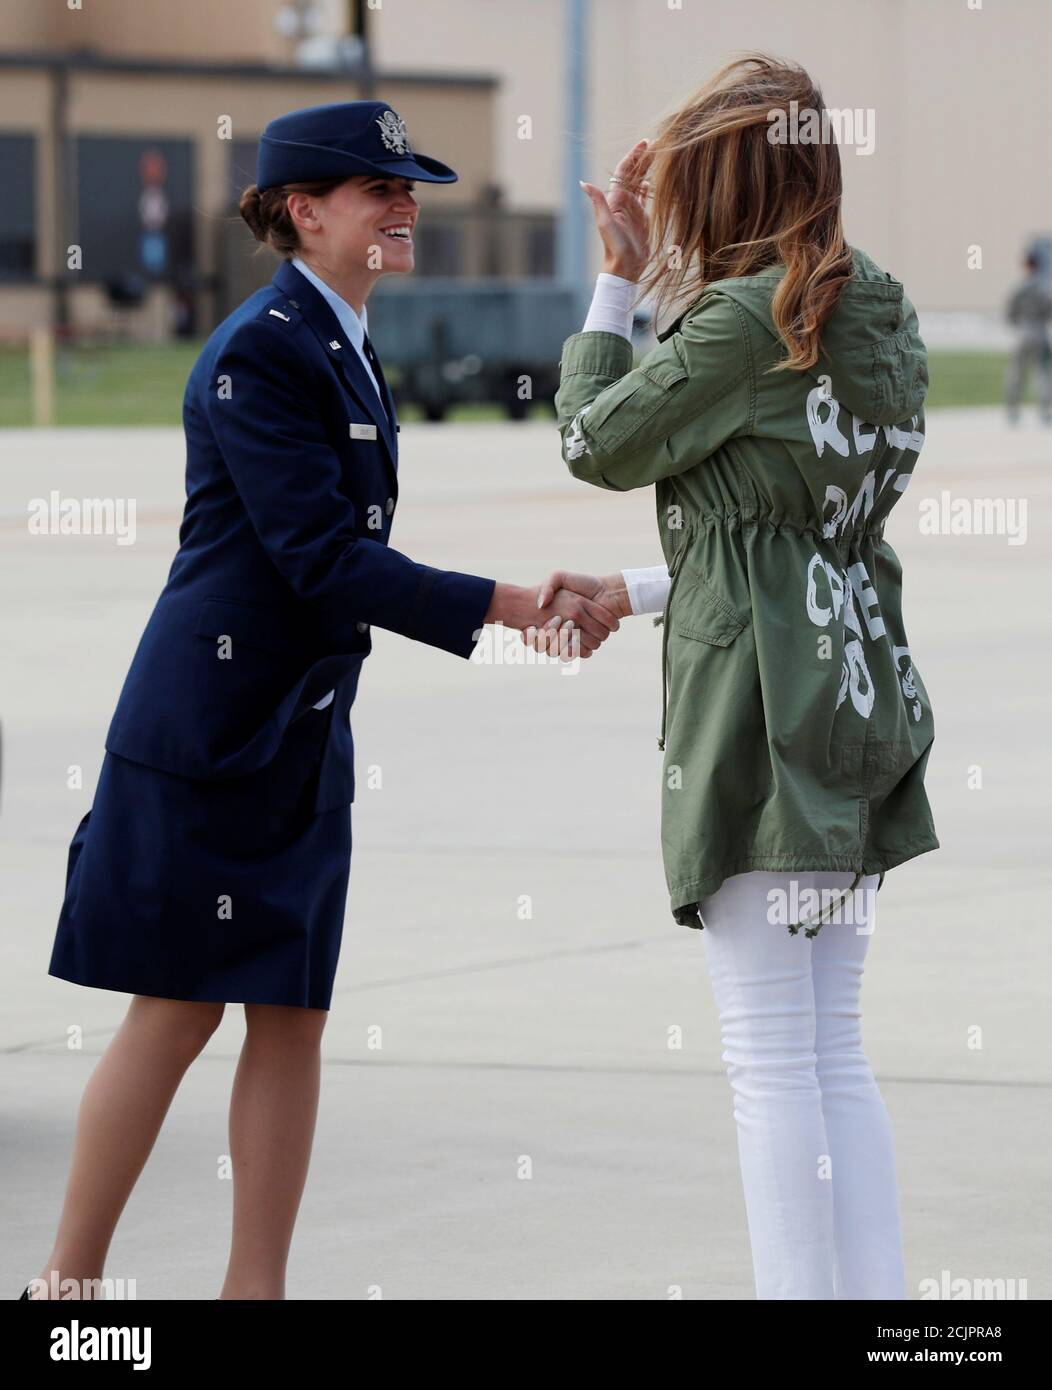 U.S. first lady Melania Trump is greeted on the tarmac by a U.S. Air Force  officer as the first lady returns to Washington wearing a Zara design jacket  with the phrase "I